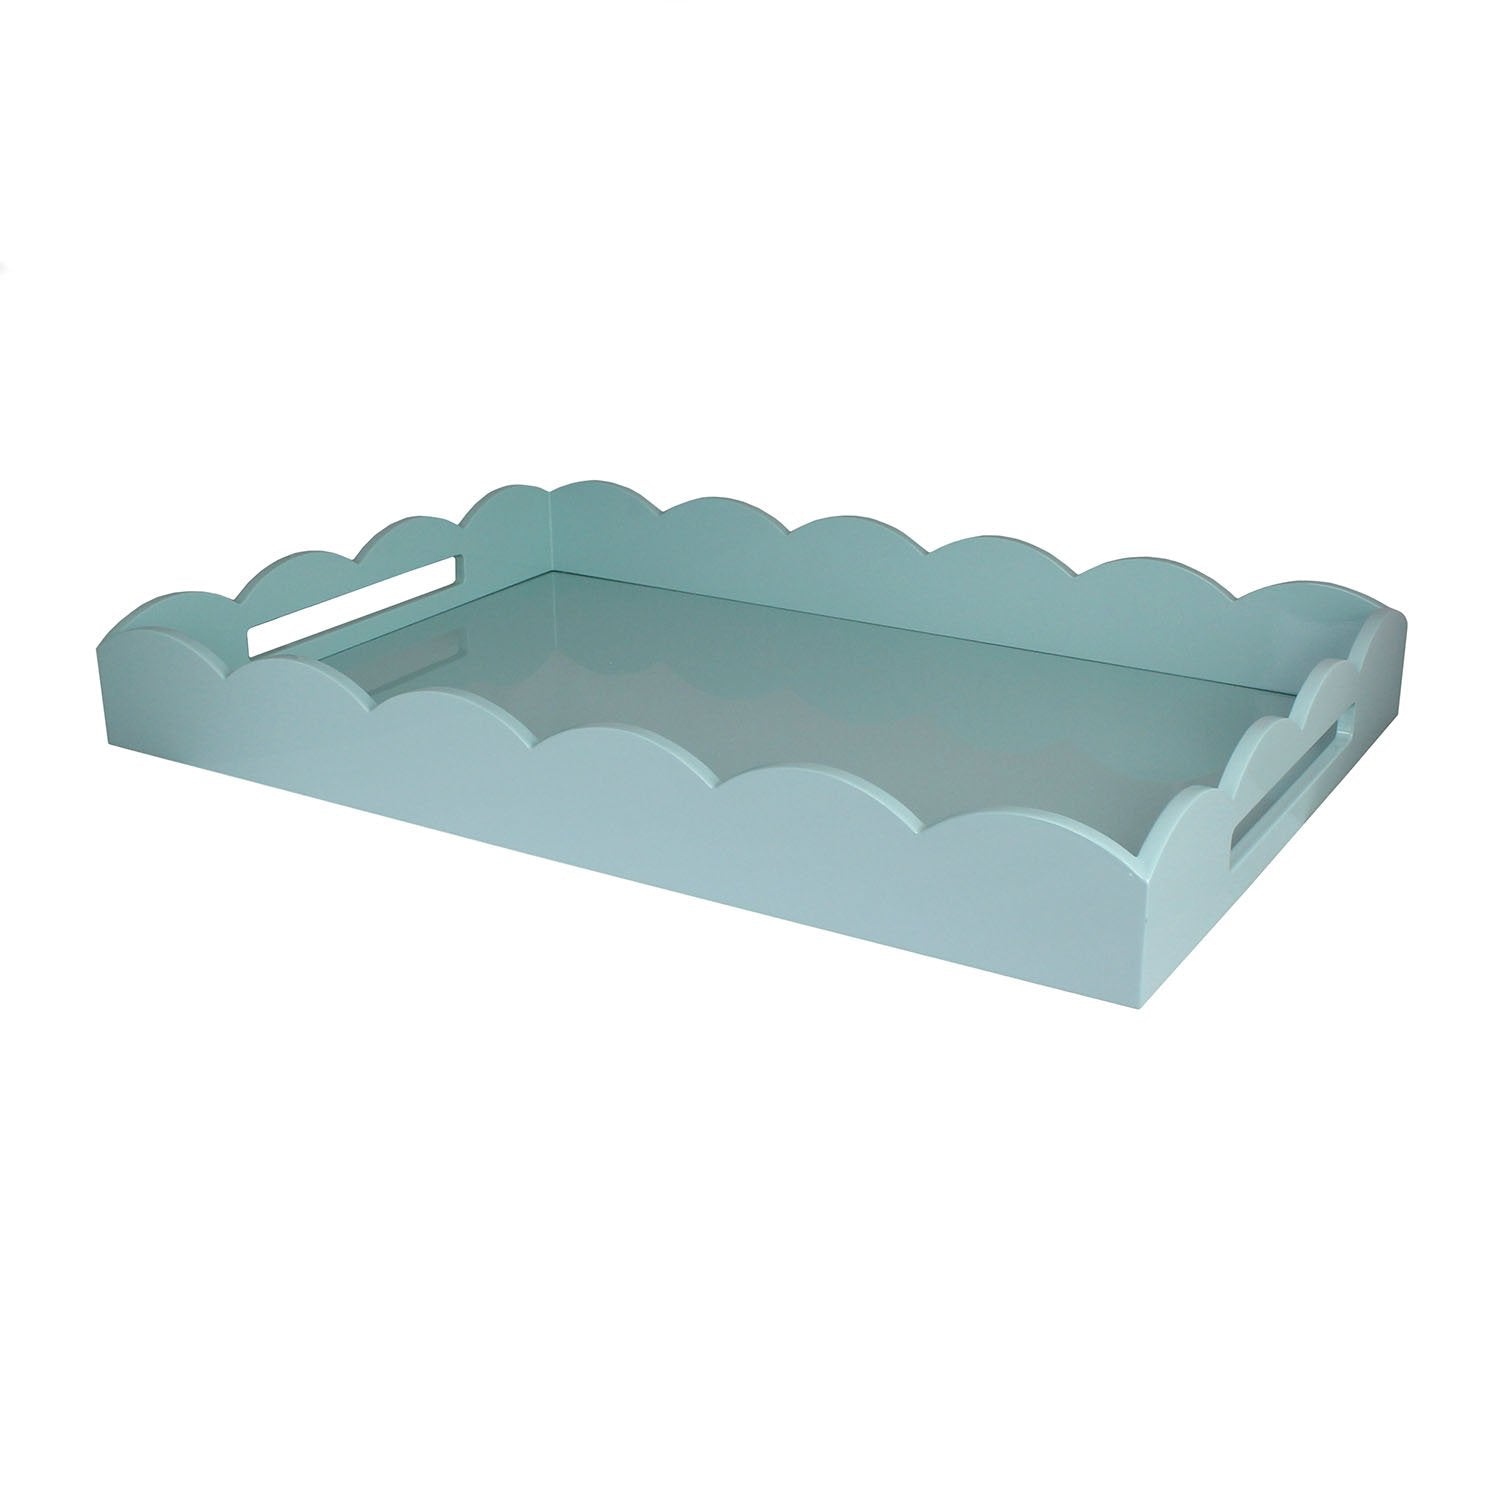 Large Eau De Nil lacquer tray with a scalloped edge